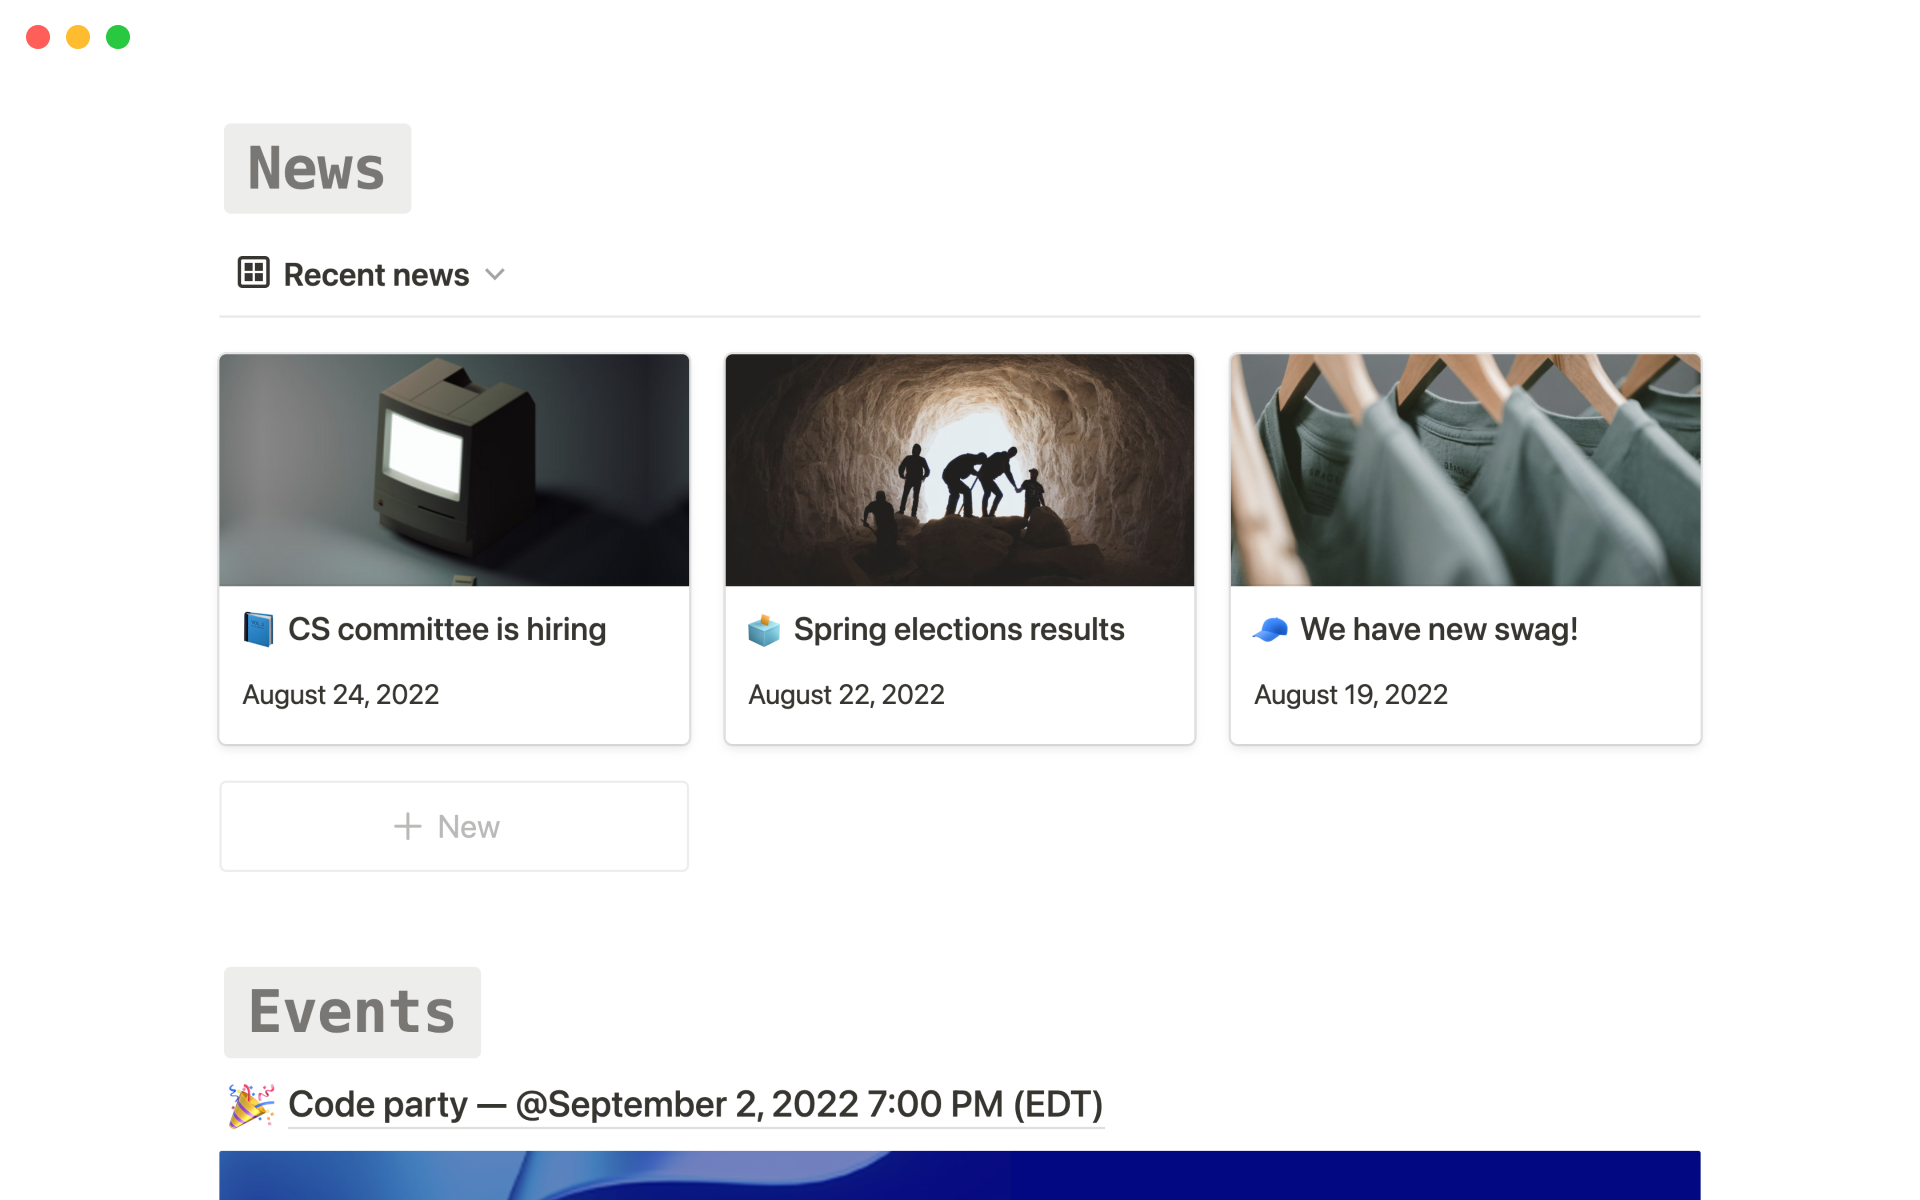 Create a public club home on Notion to host your hackathon events, news, internship guides, coding resources, and more!